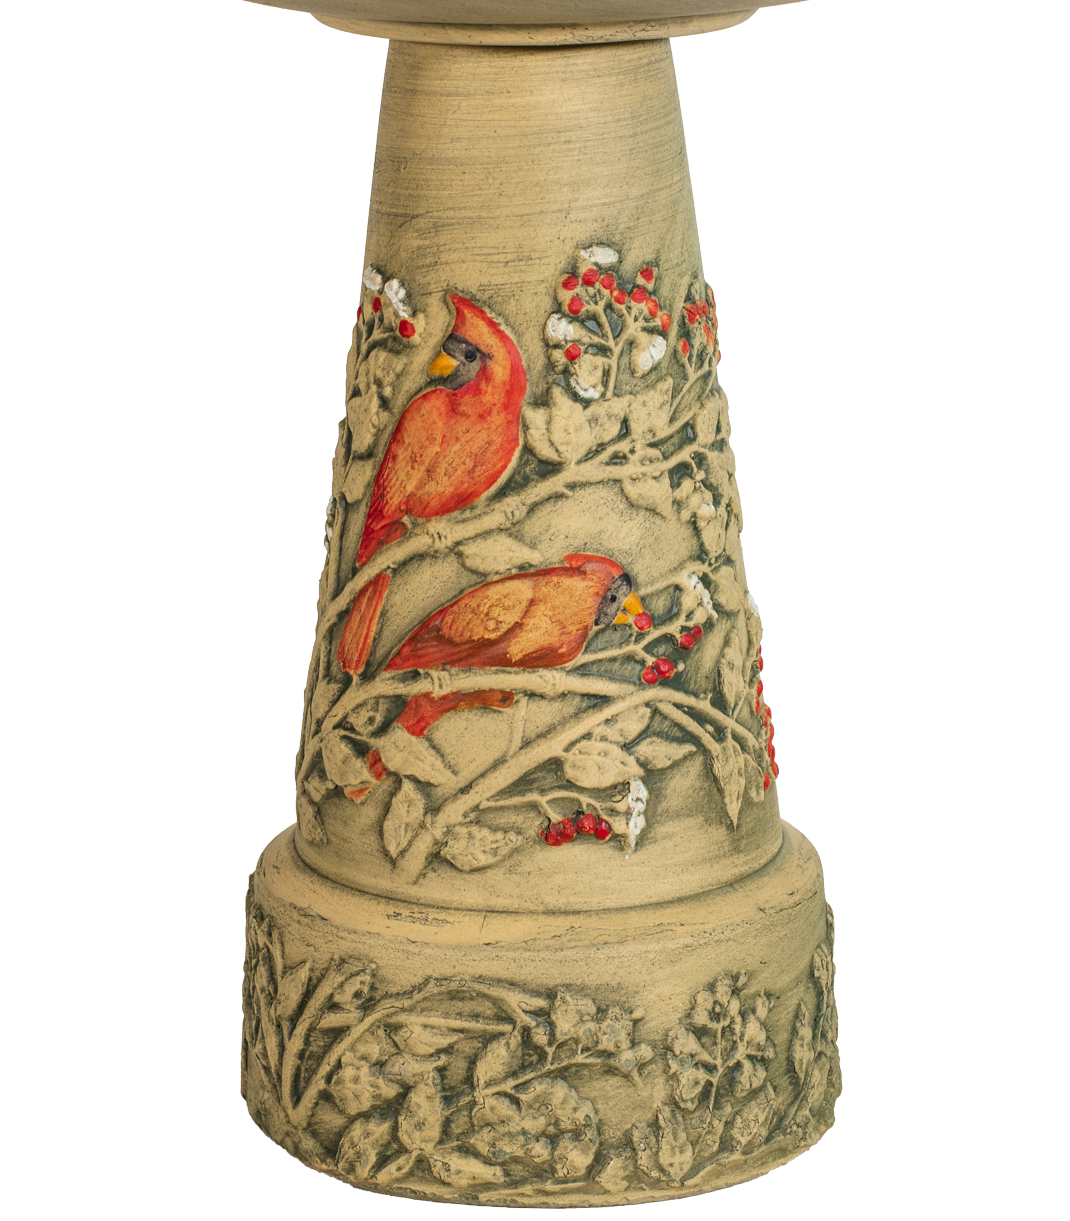 brown aged birdbath pedestal with hand painted red cardinal birds and berries